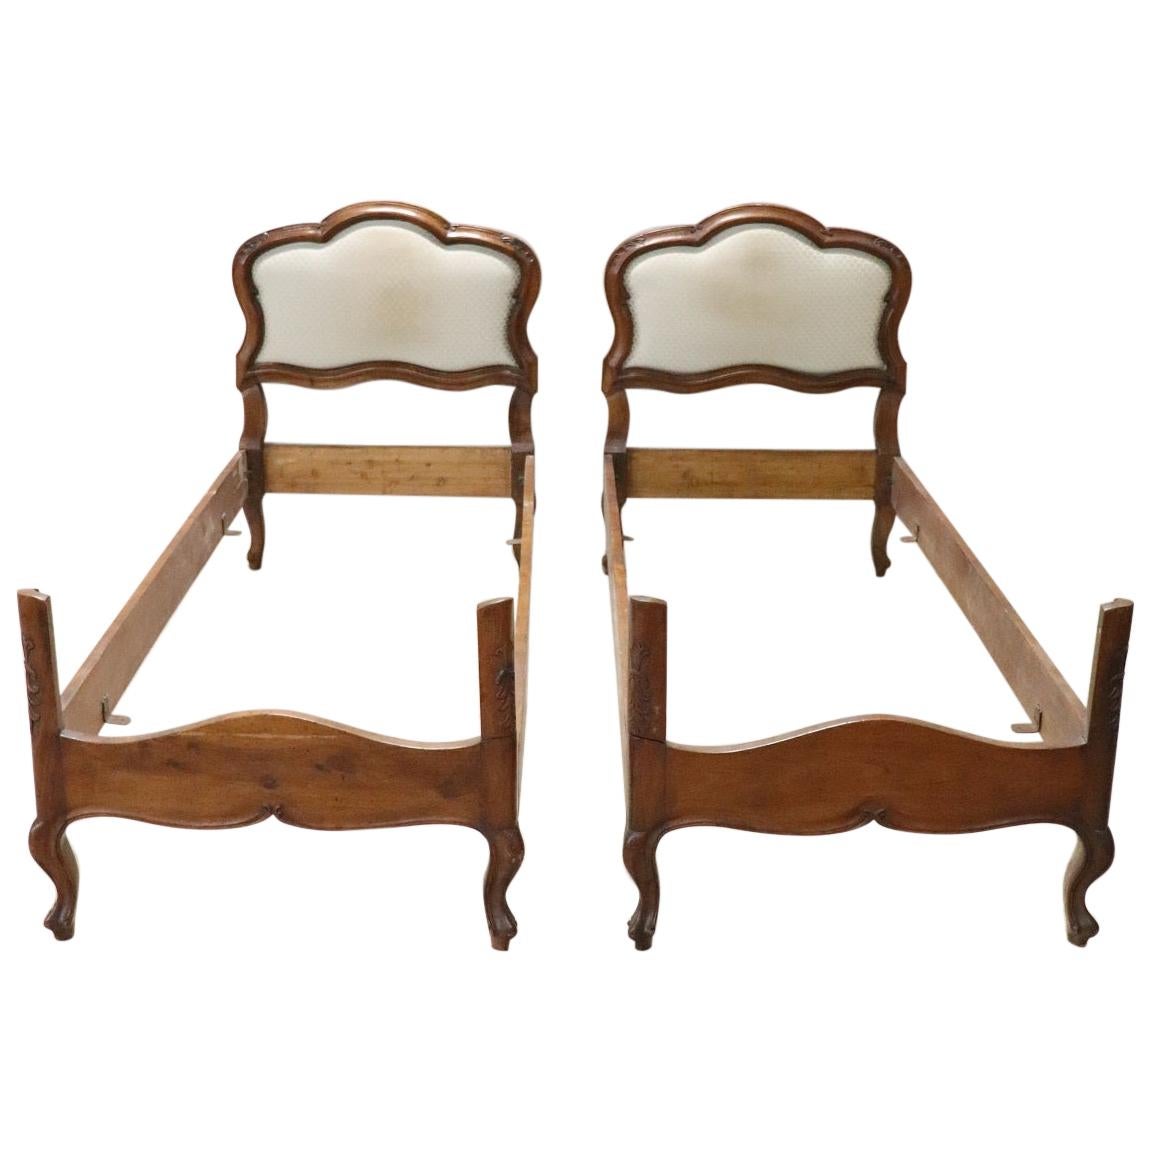 Early 20th Century Italian Louis XIV Style Carved Walnut Pair of Single Beds